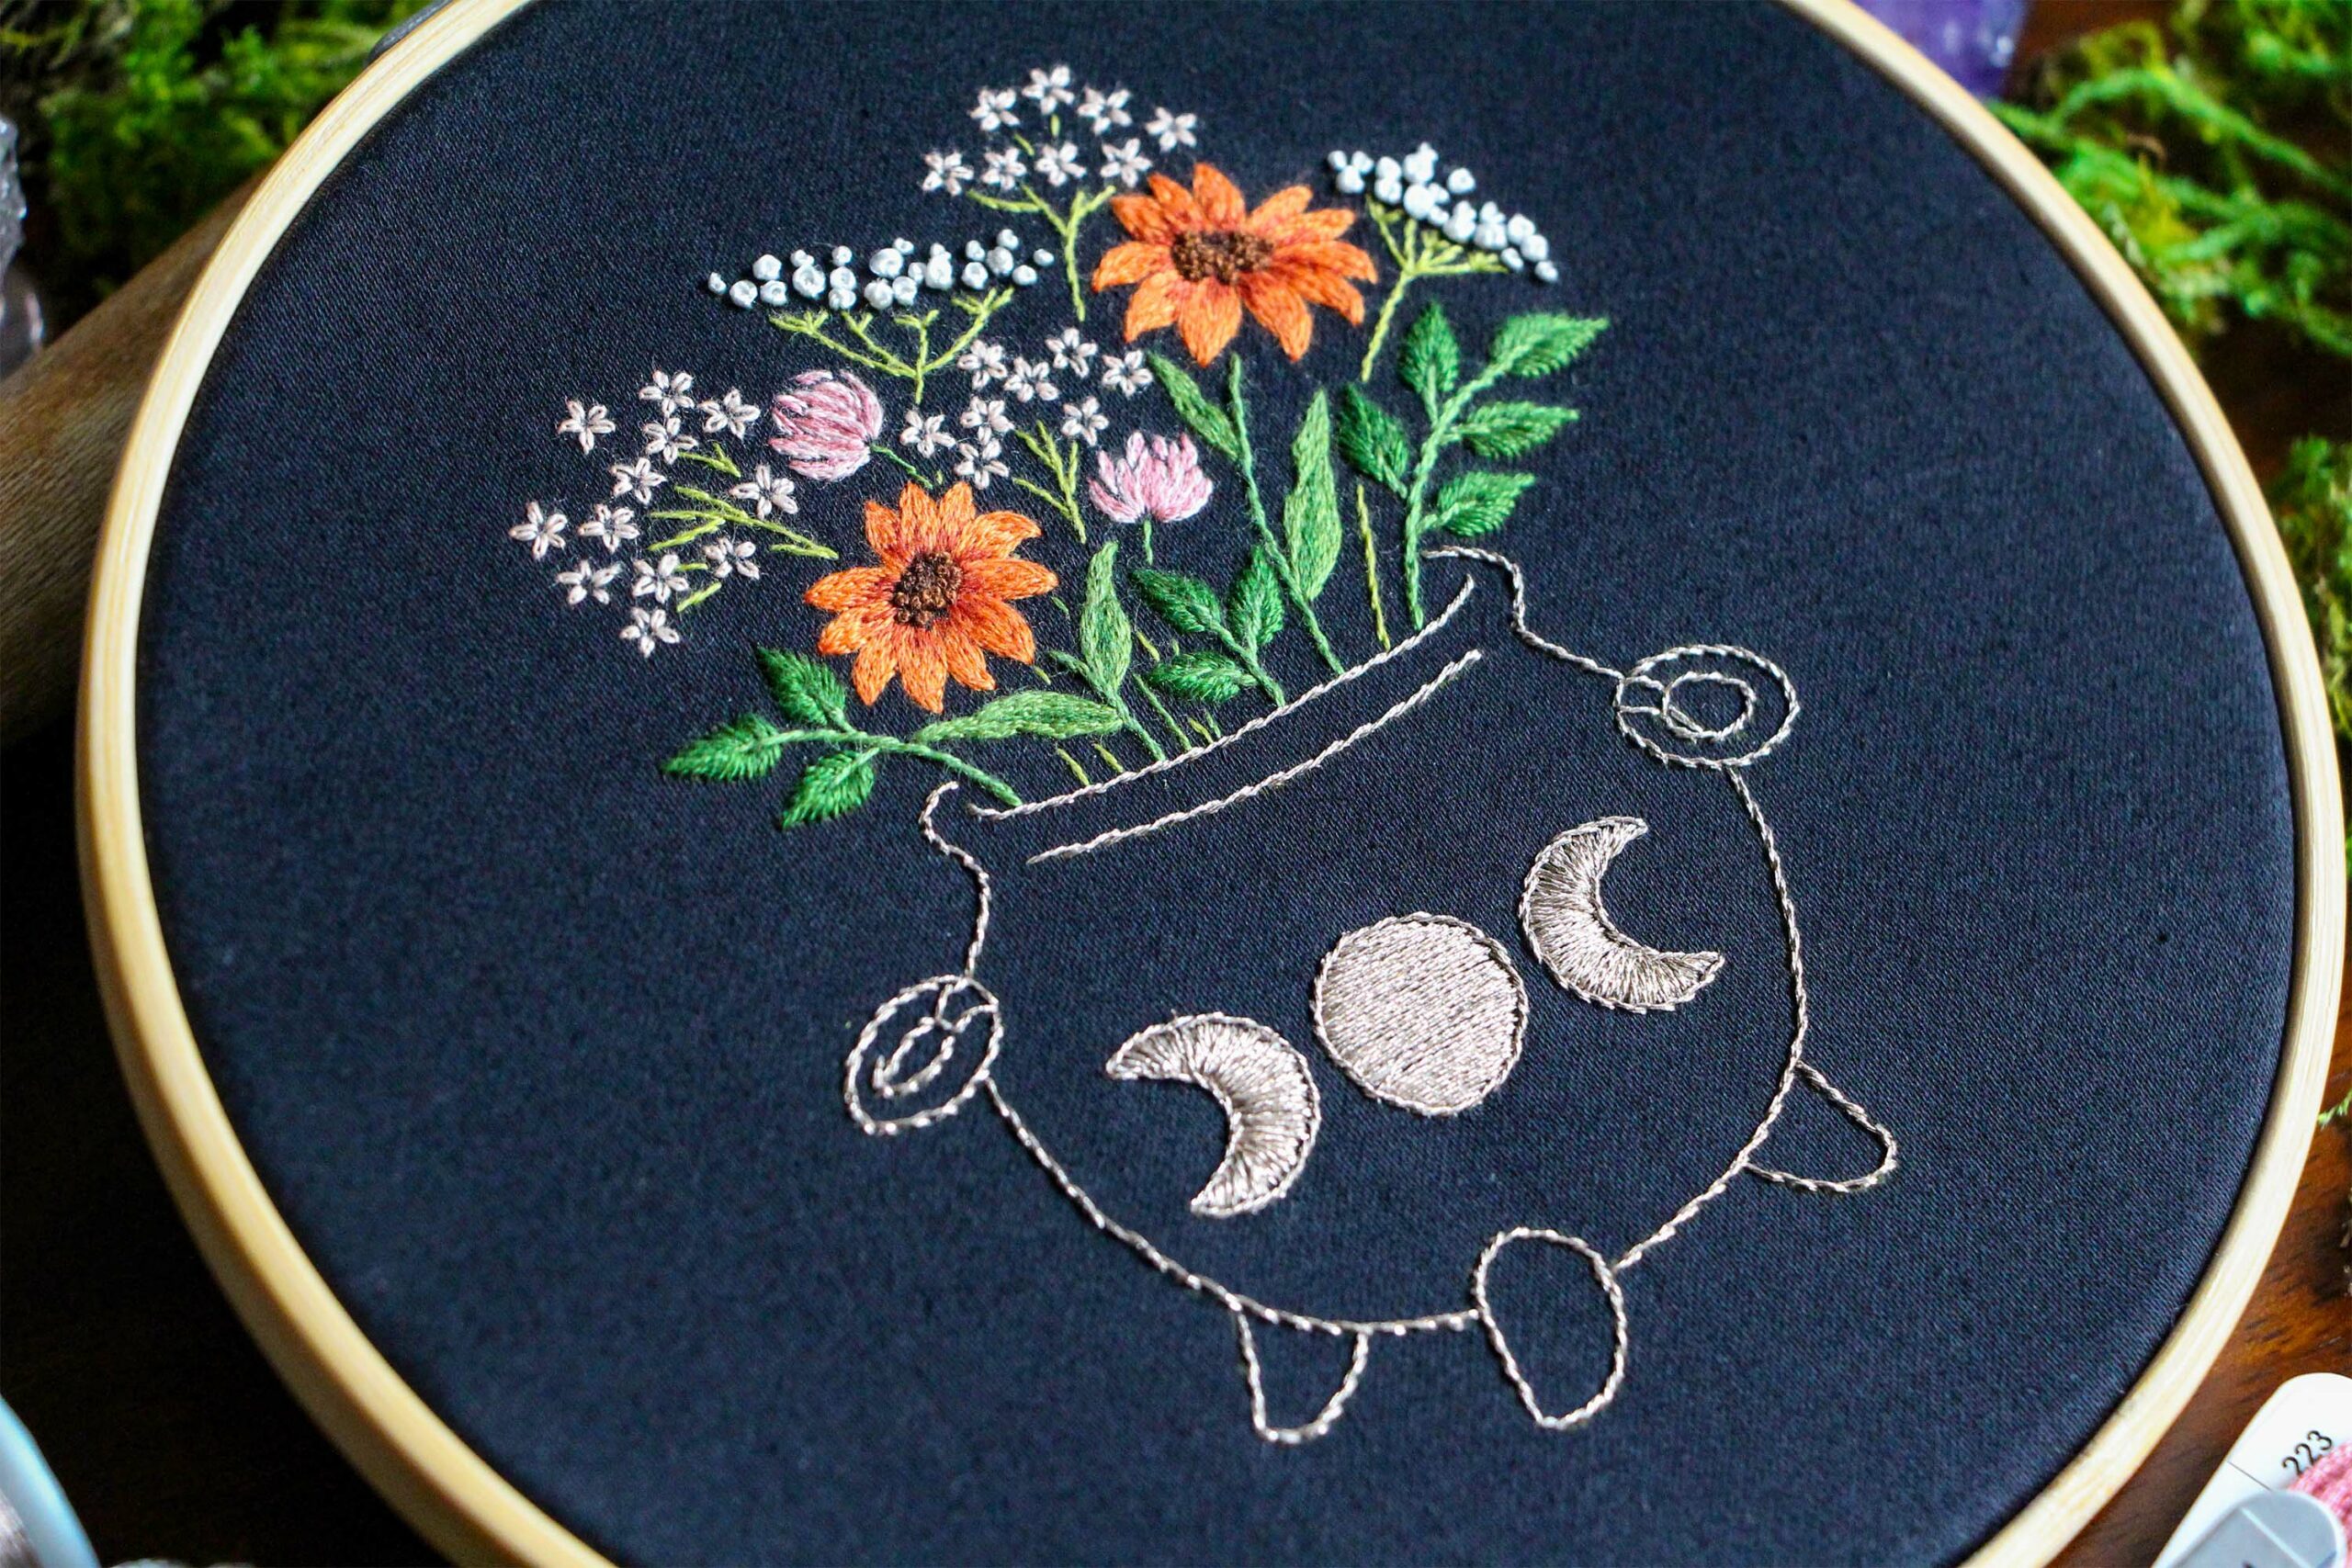 A close up of the Wildflower Cauldron embroidery shows the thread painted flowers bursting out of the embroidered cauldron